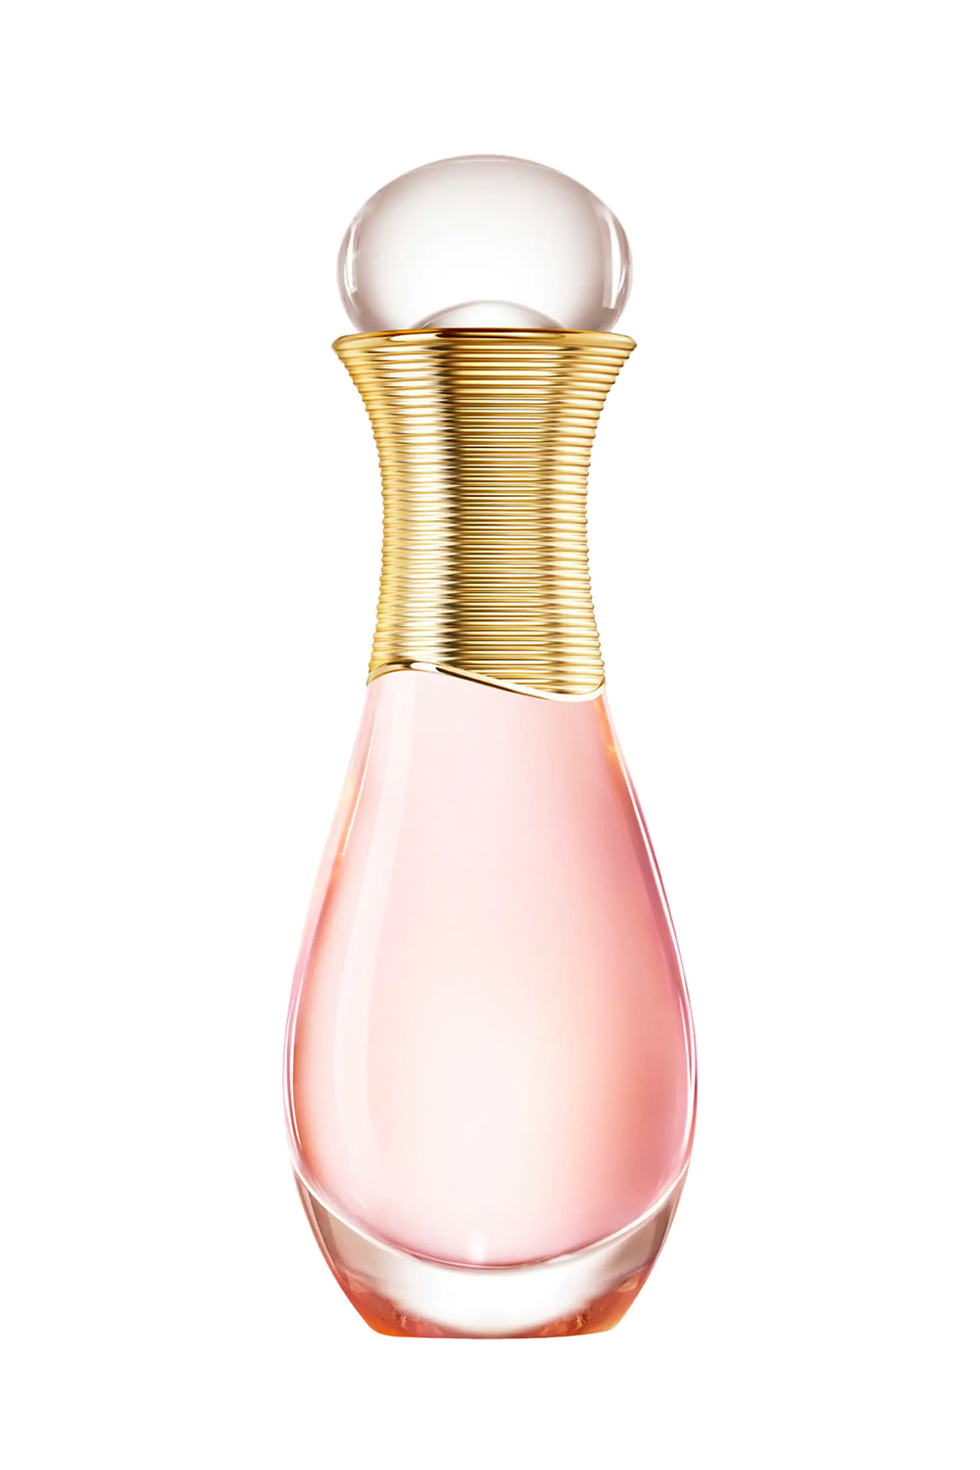 Chanel No. 5 Perfume Roller - Lady G